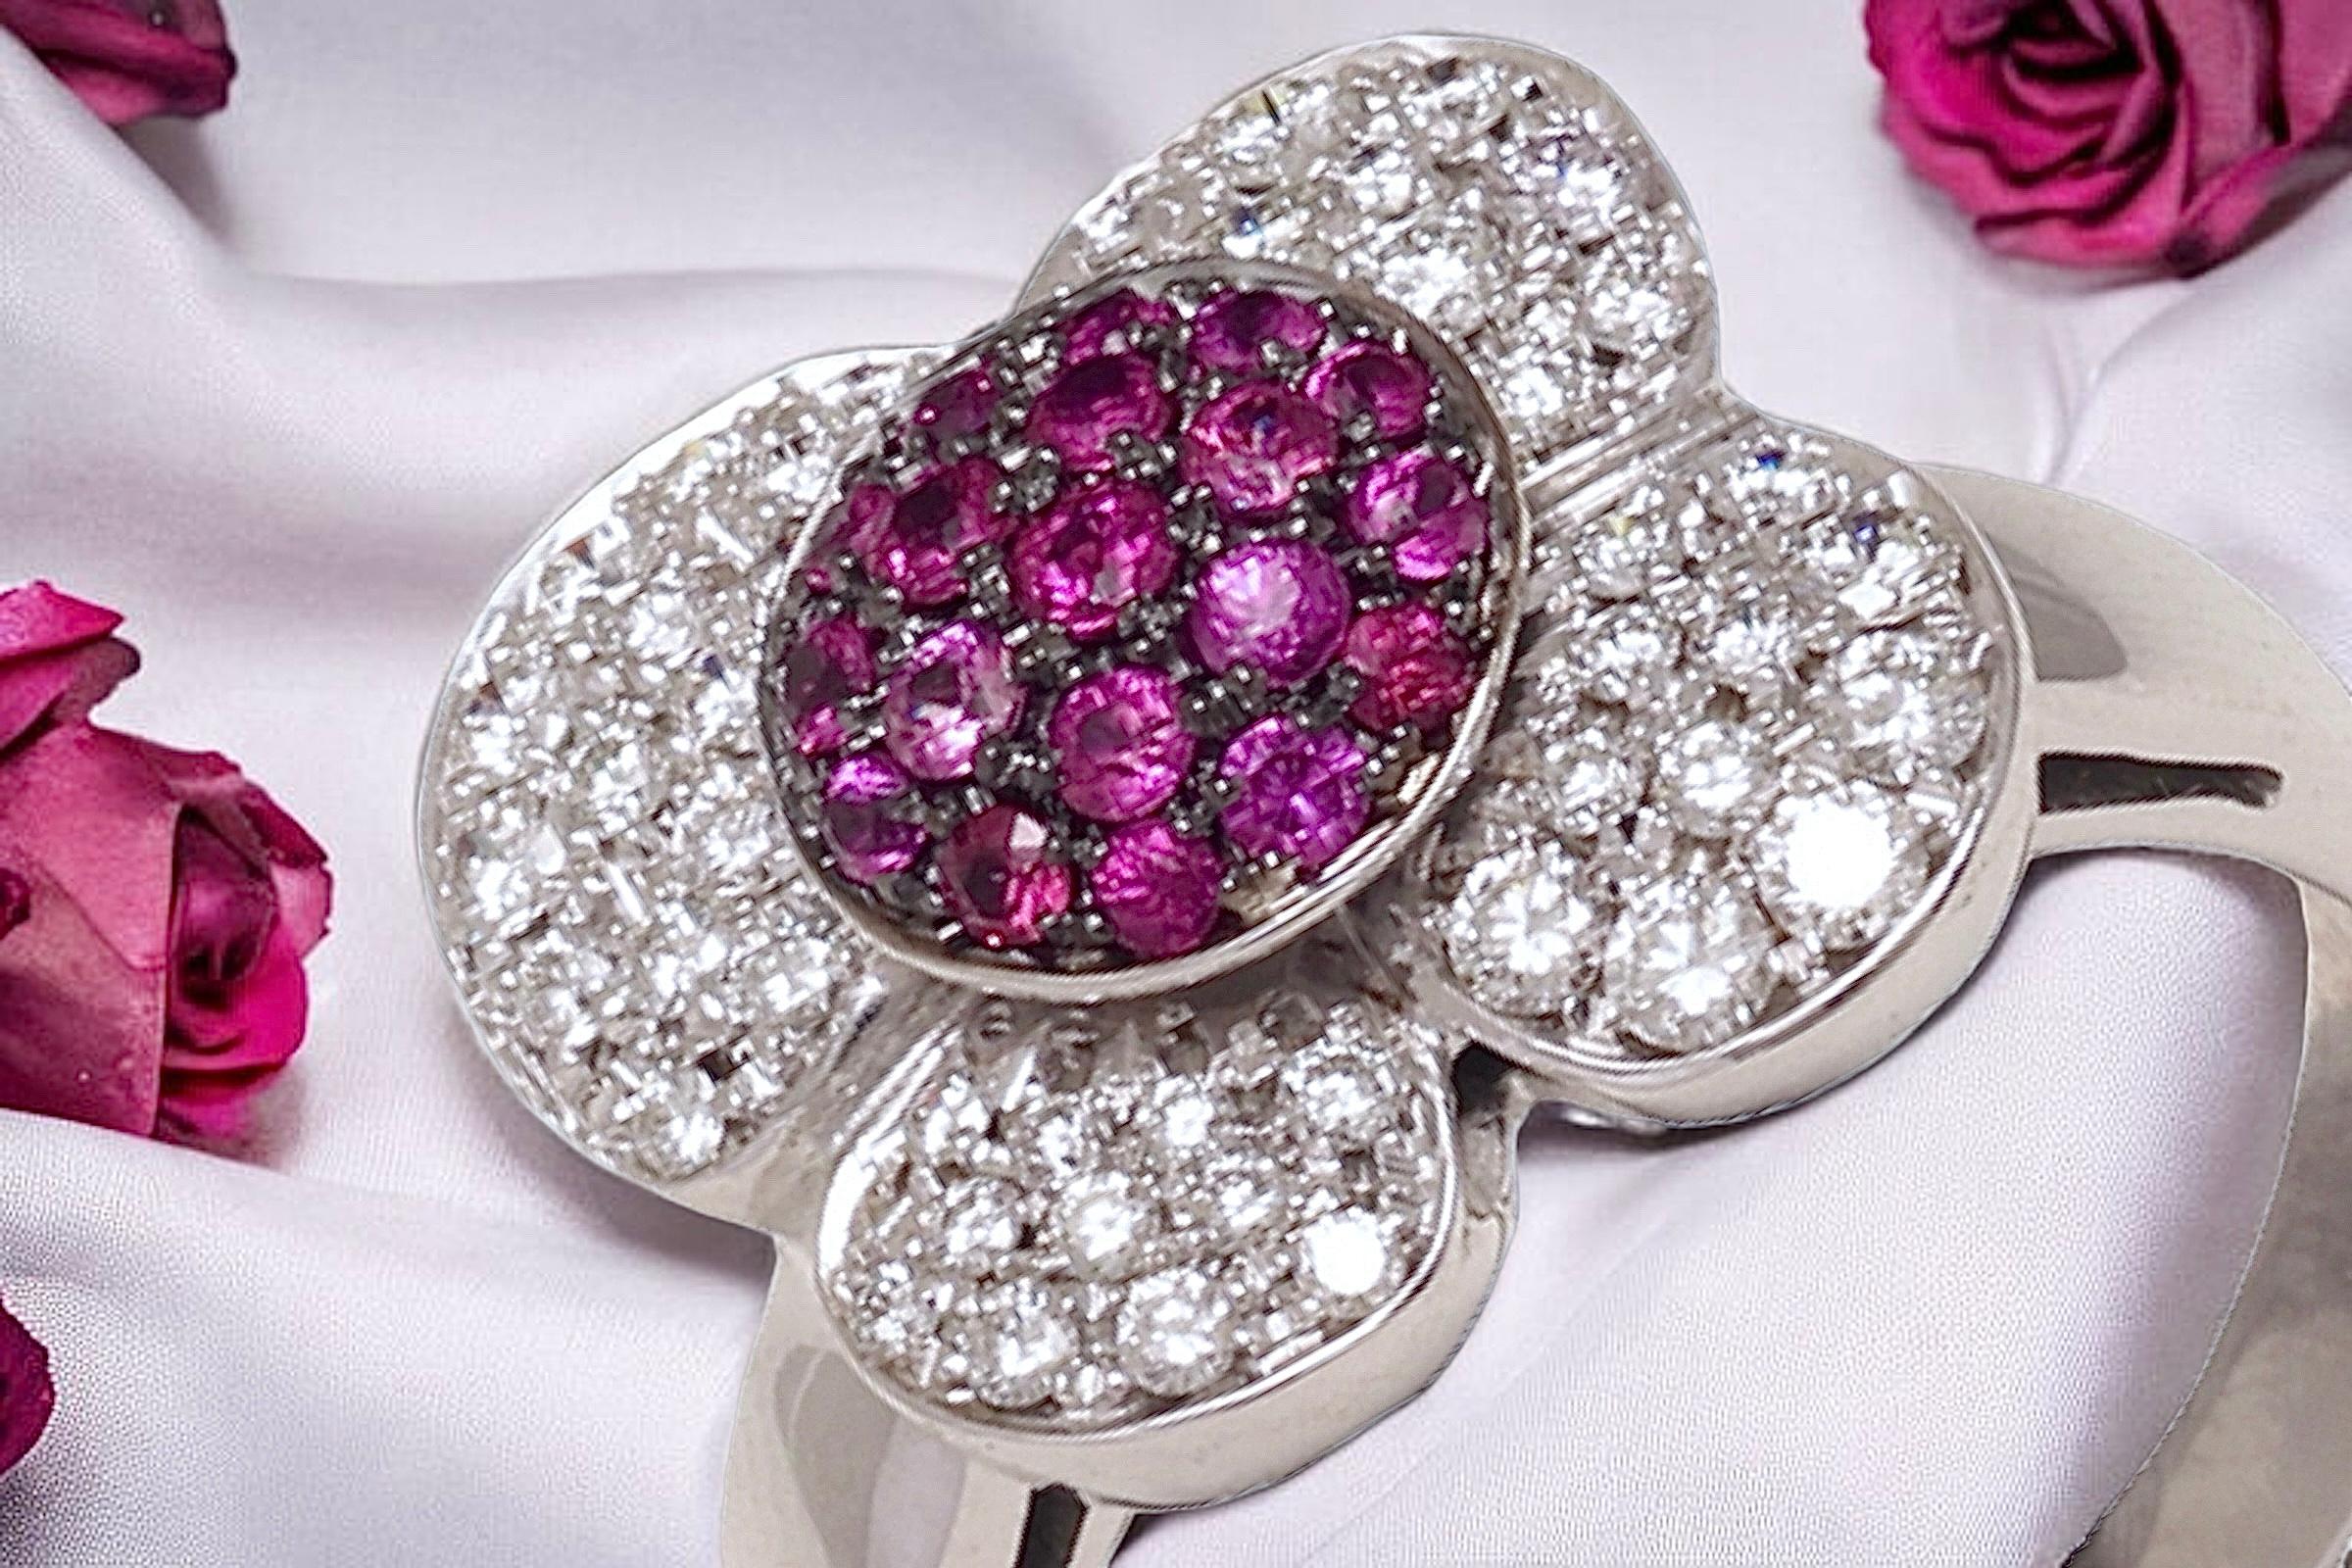  18 kt. White Gold Flower Shape Ring with 1 ct. Diamonds & 0.5 ct. Pink Sapphire For Sale 4